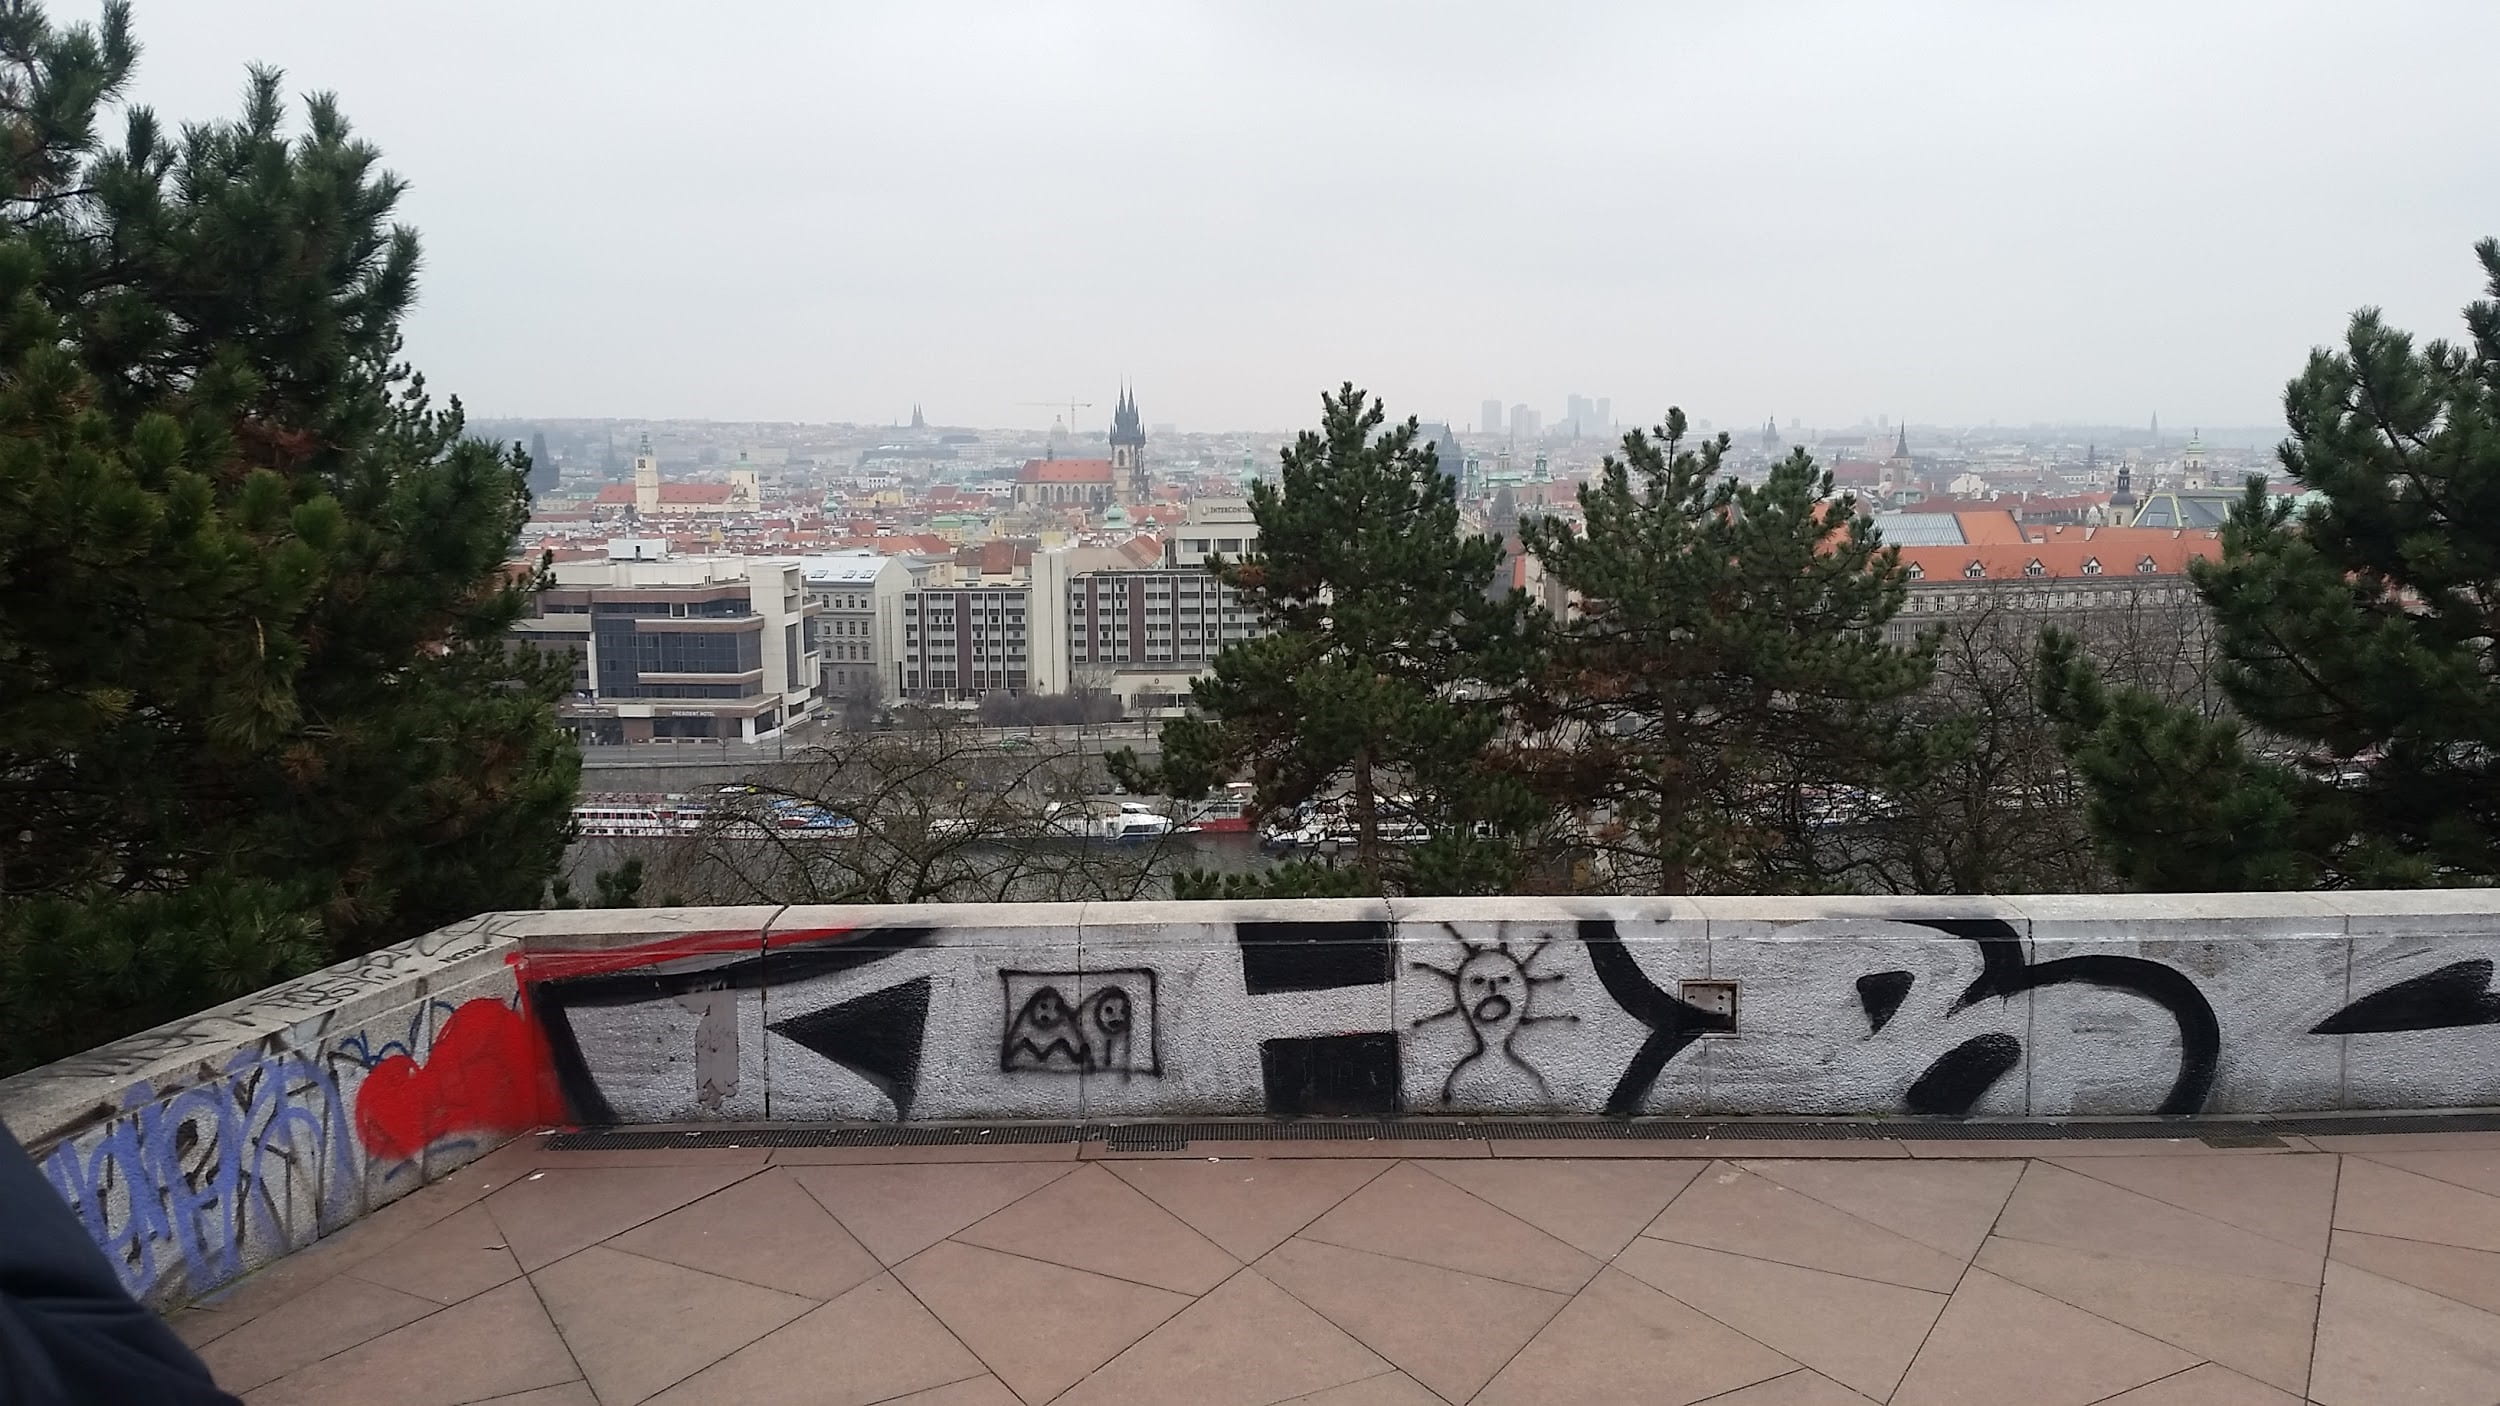 View of Prague from rooftop